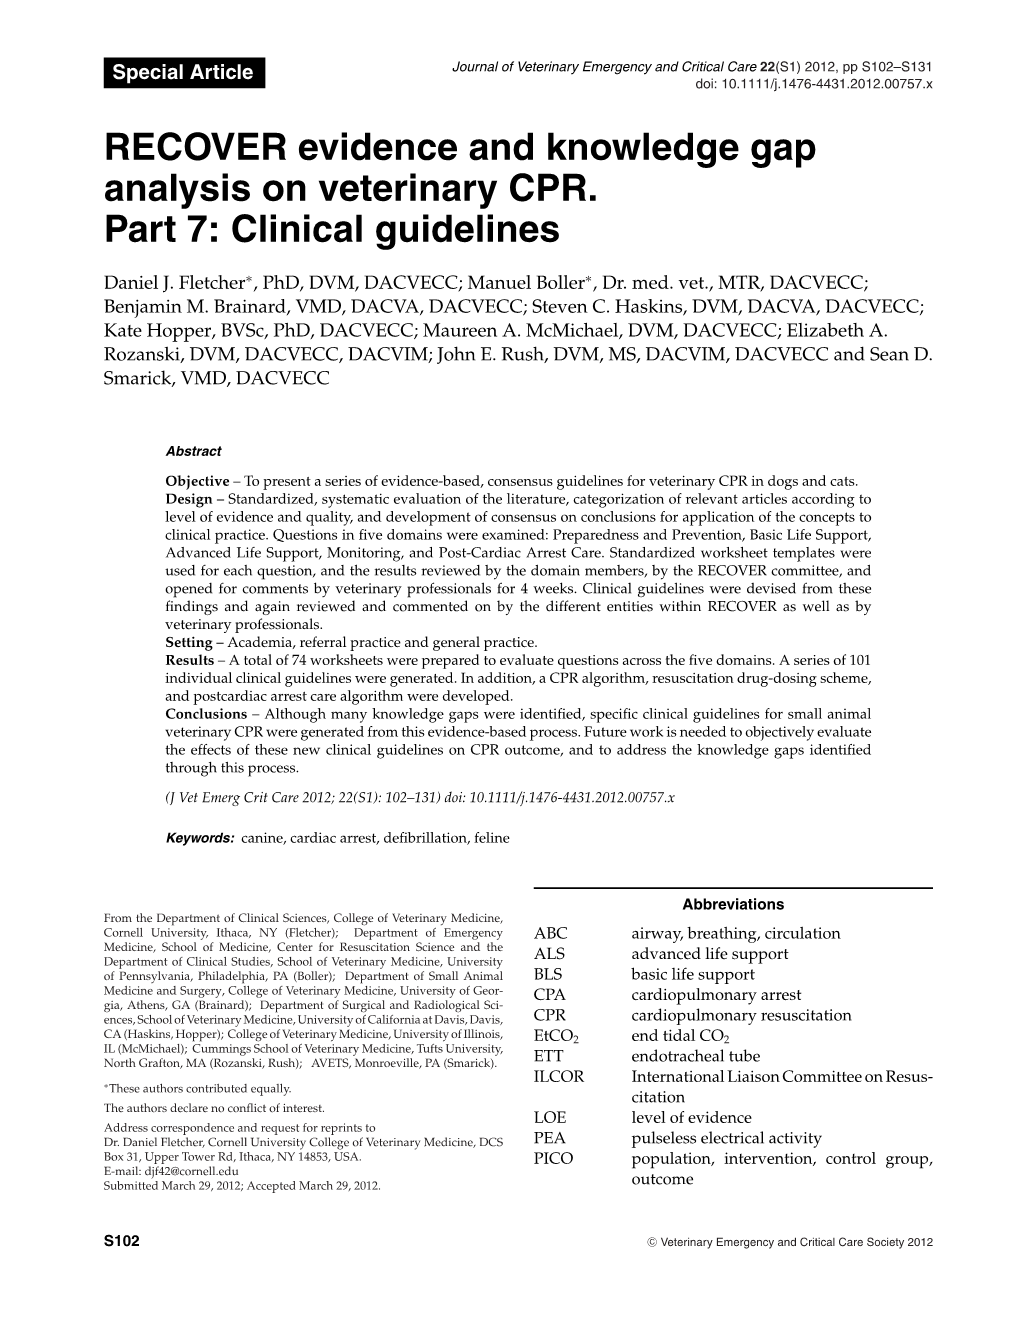 RECOVER Evidence and Knowledge Gap Analysis on Veterinary CPR. Part 7: Clinical Guidelines